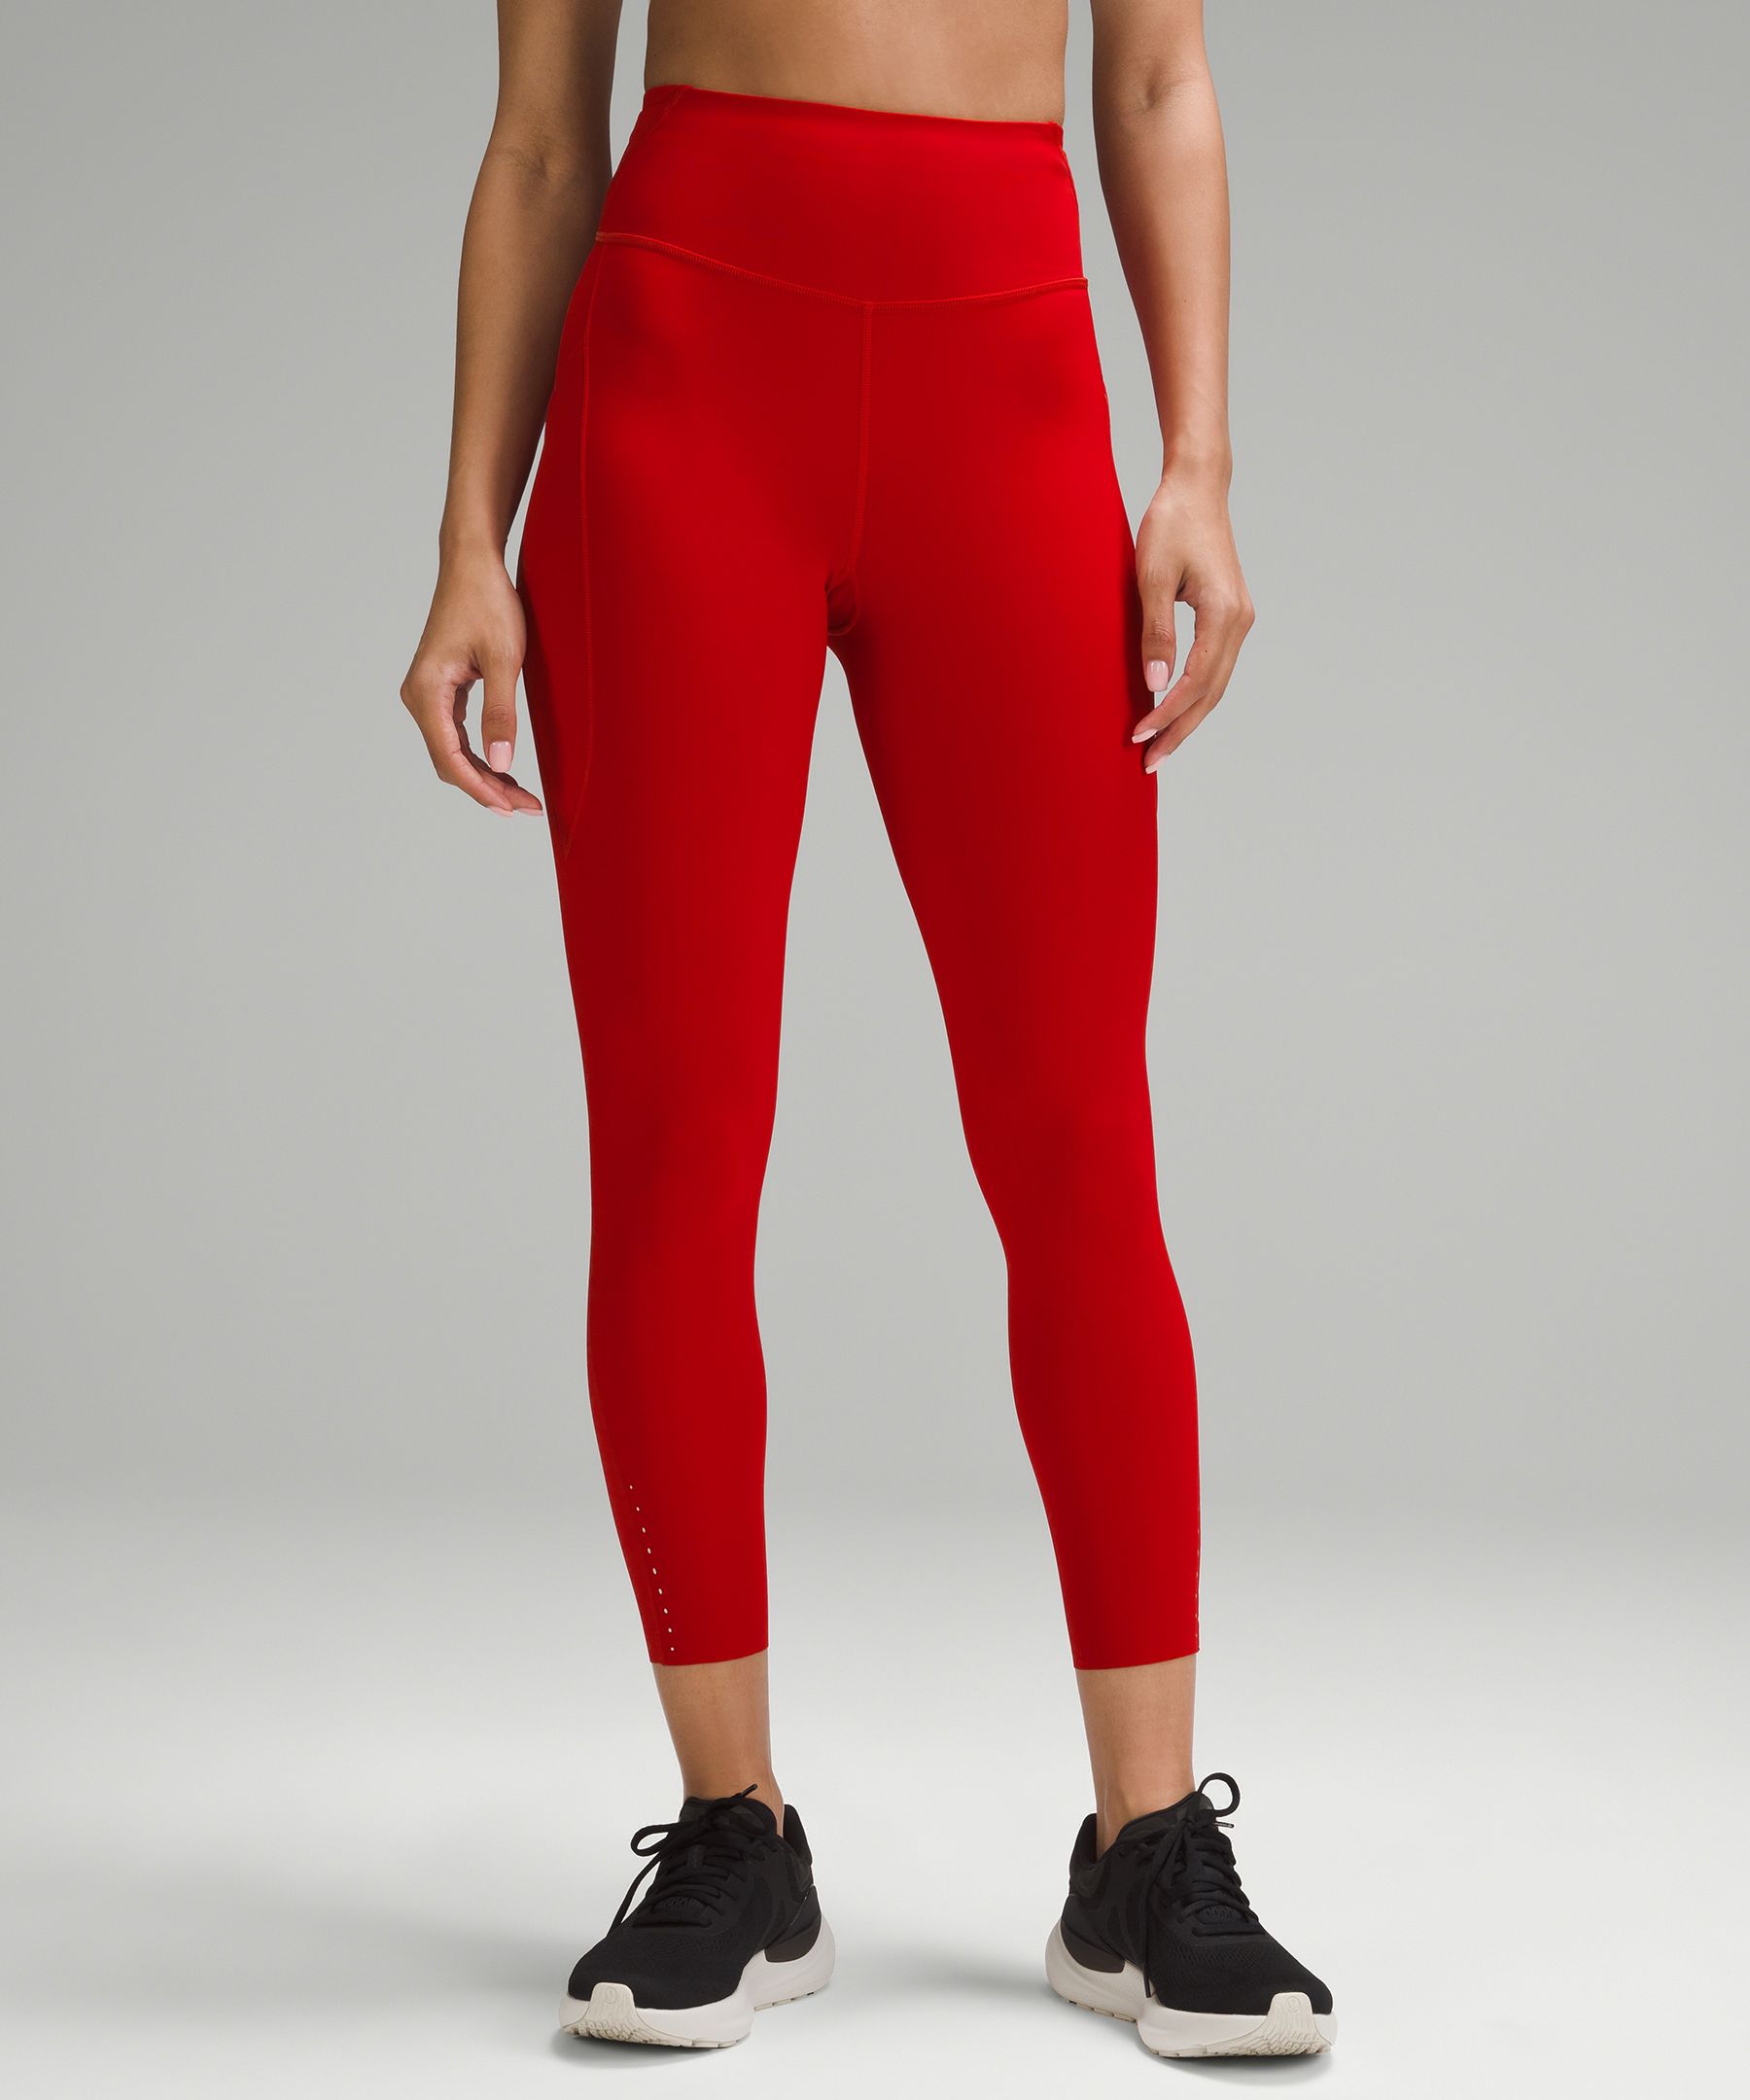 Fast and Free High-Rise Tight 28” Pockets *Updated - Lululemon